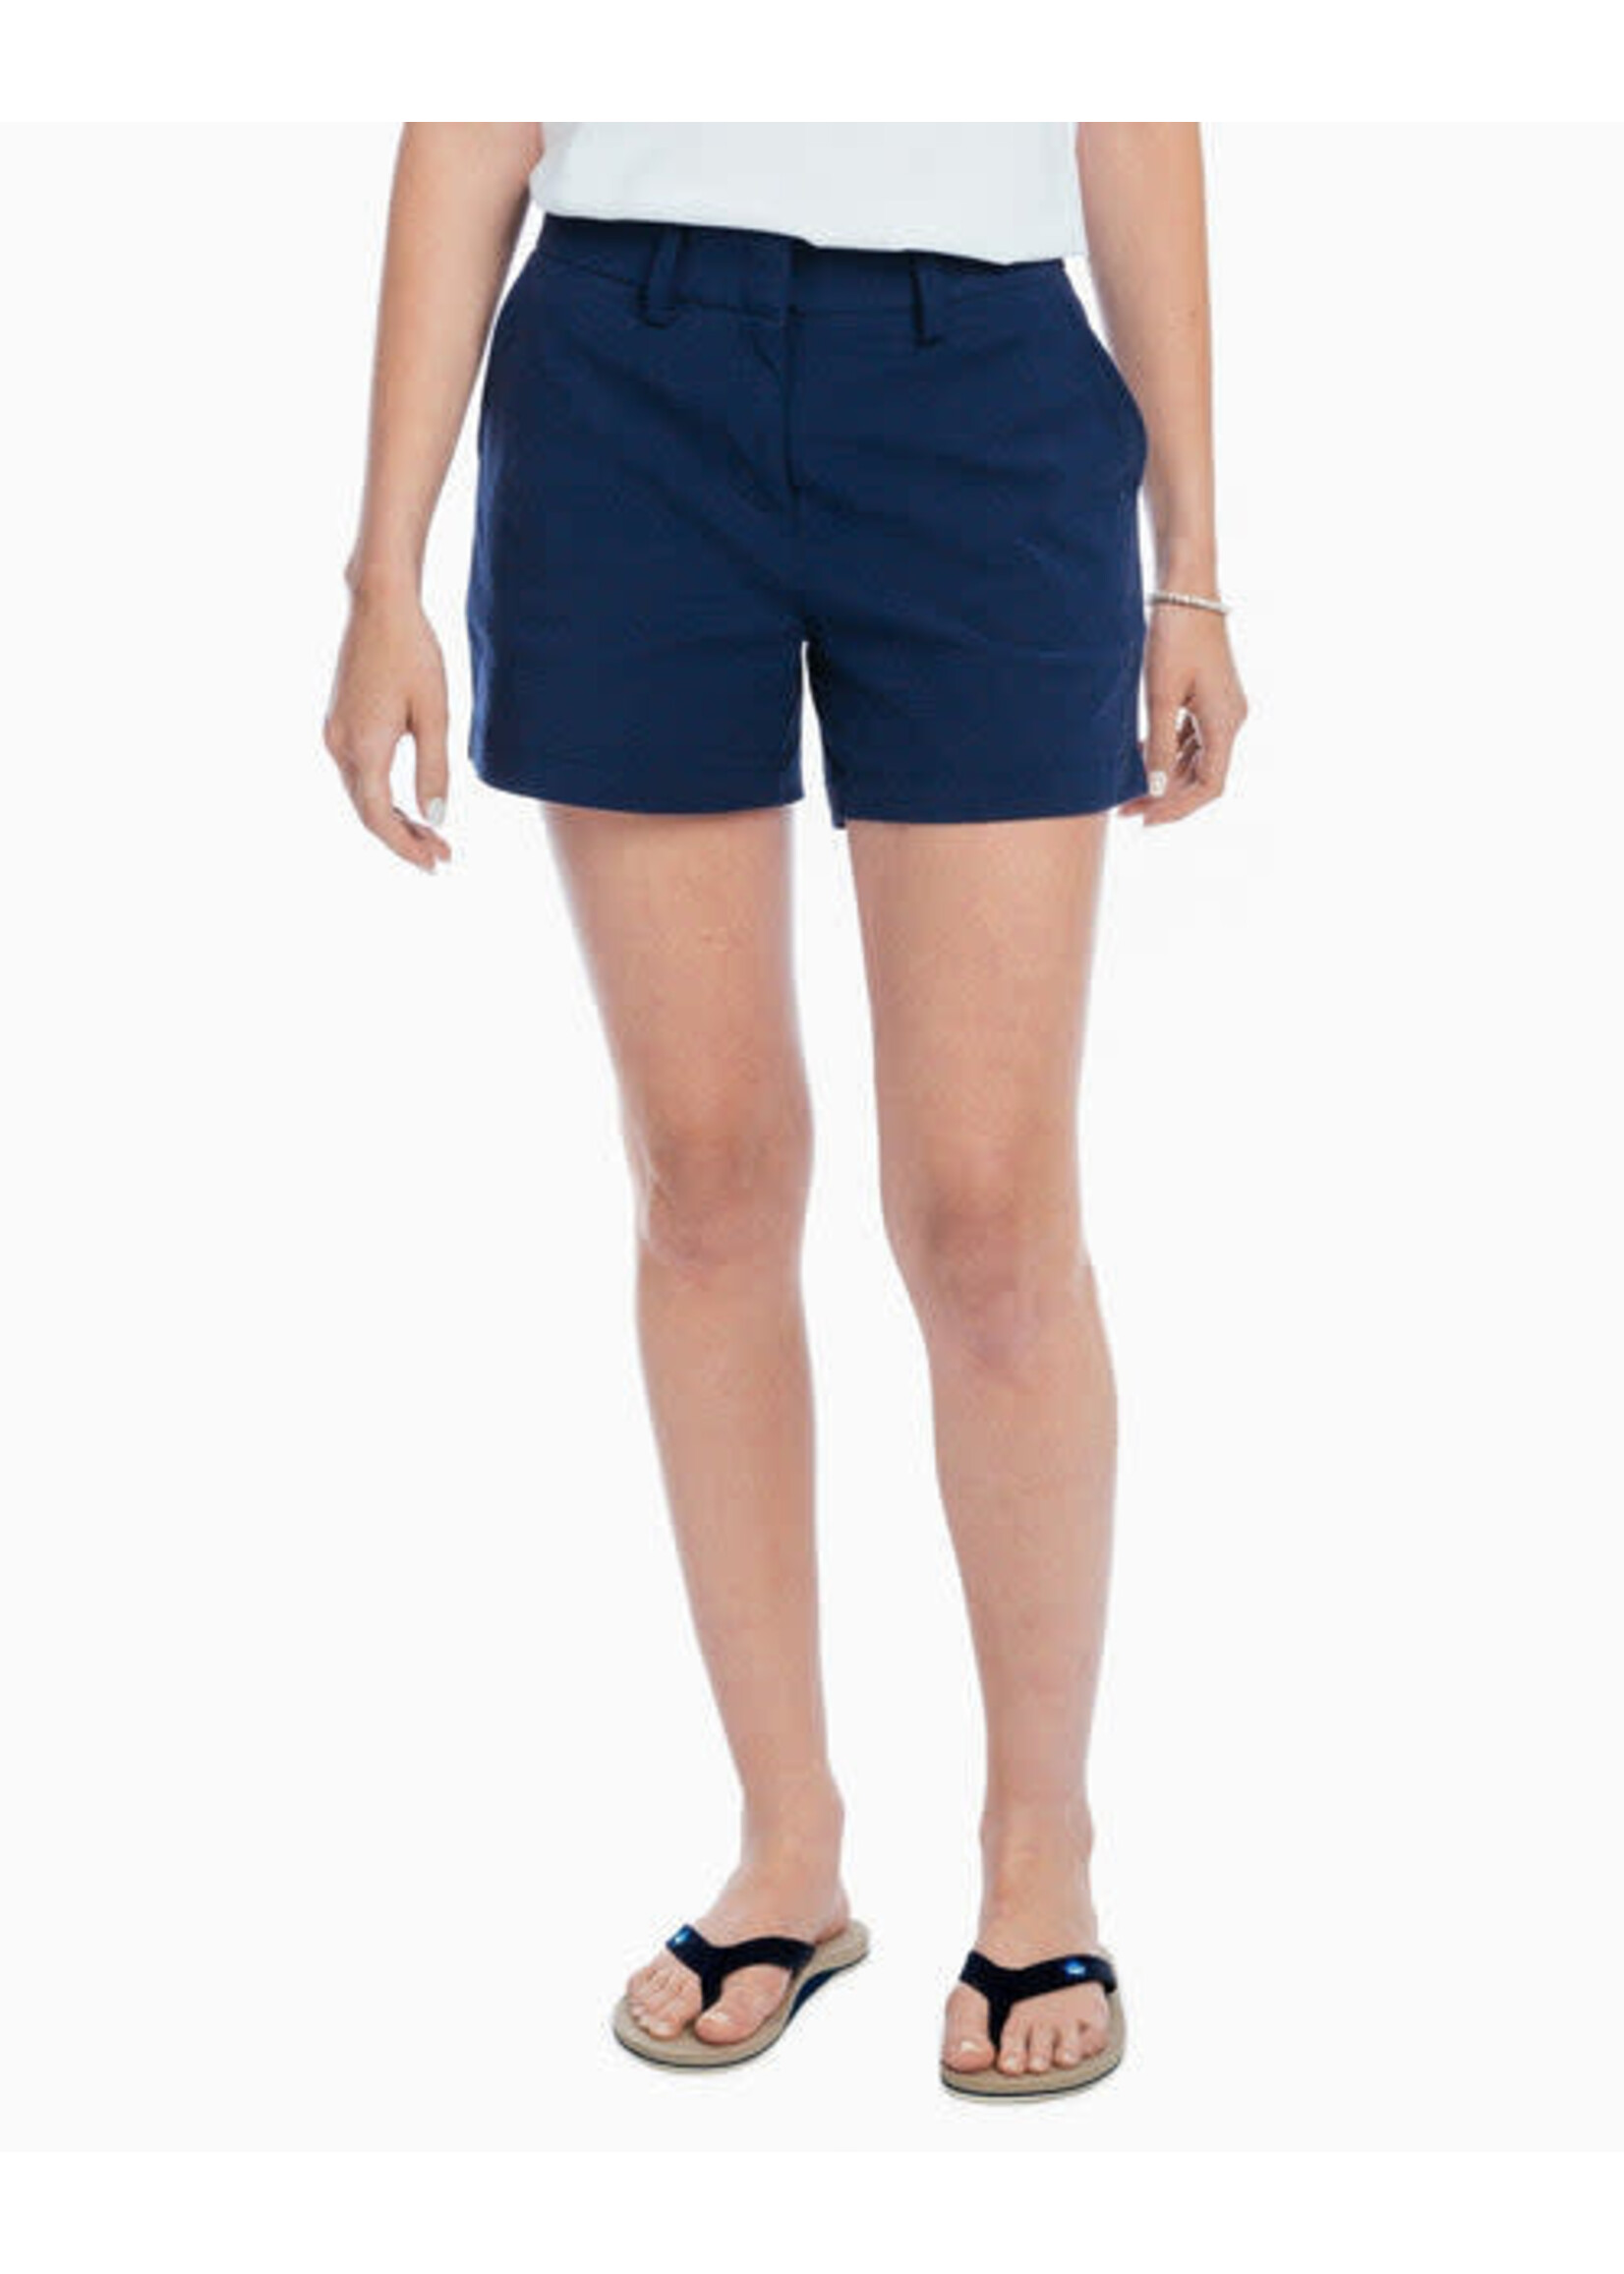 Southern Tide Inlet 4 inch performance short